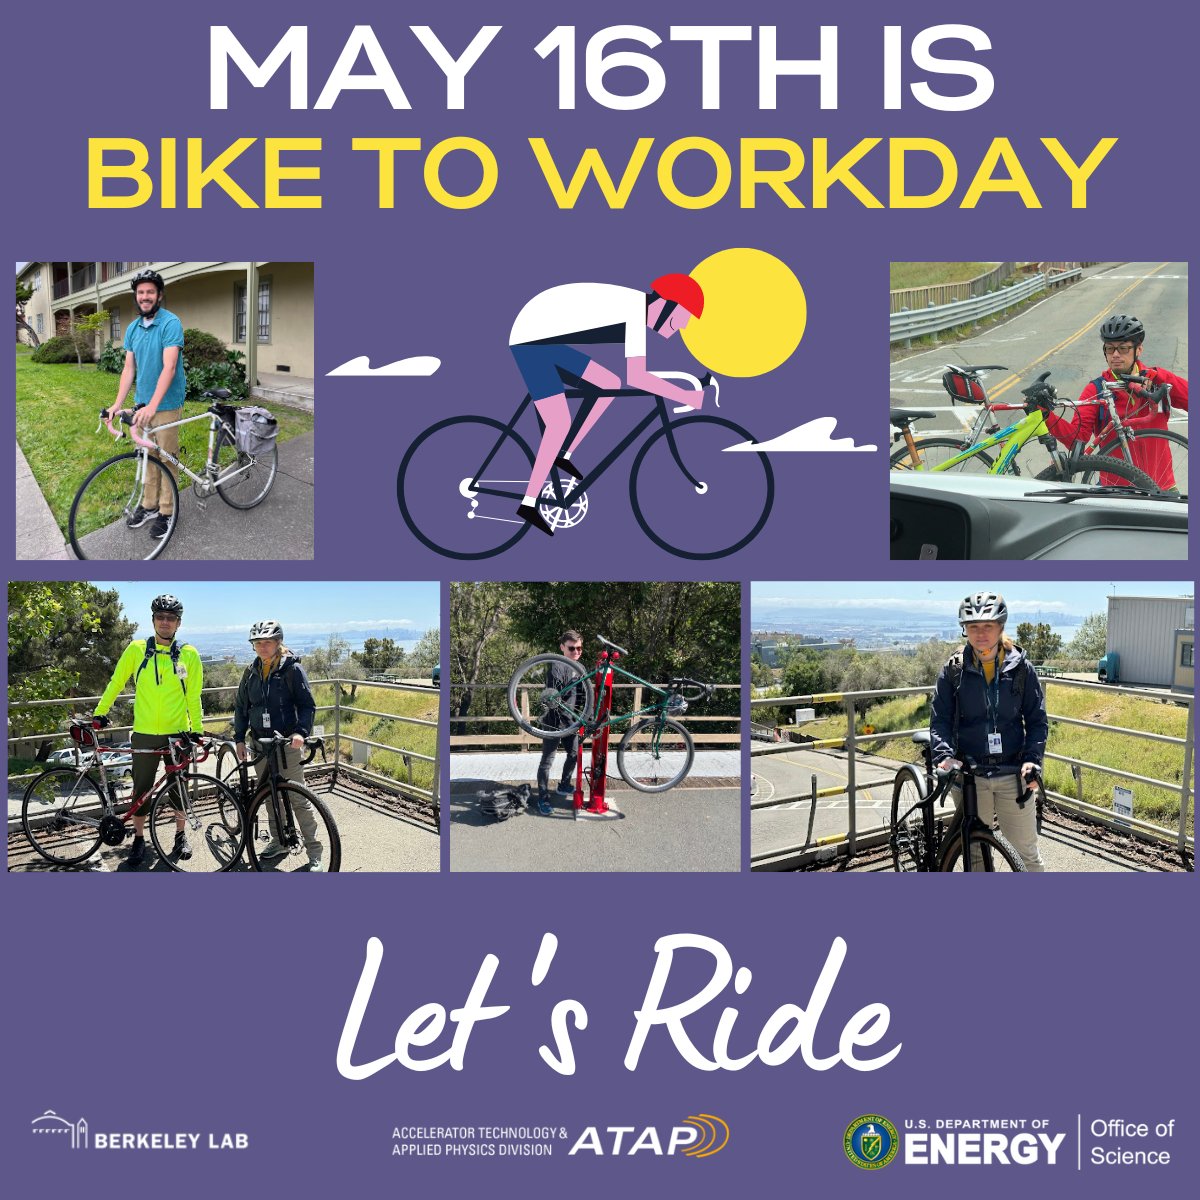 To celebrate Bike to Work Day, join our many colleagues who cycle to work and benefit from some fresh air and exercise while also saving money and helping the environment. #sustainability @BerkeleyLab @doescience @ENERGY